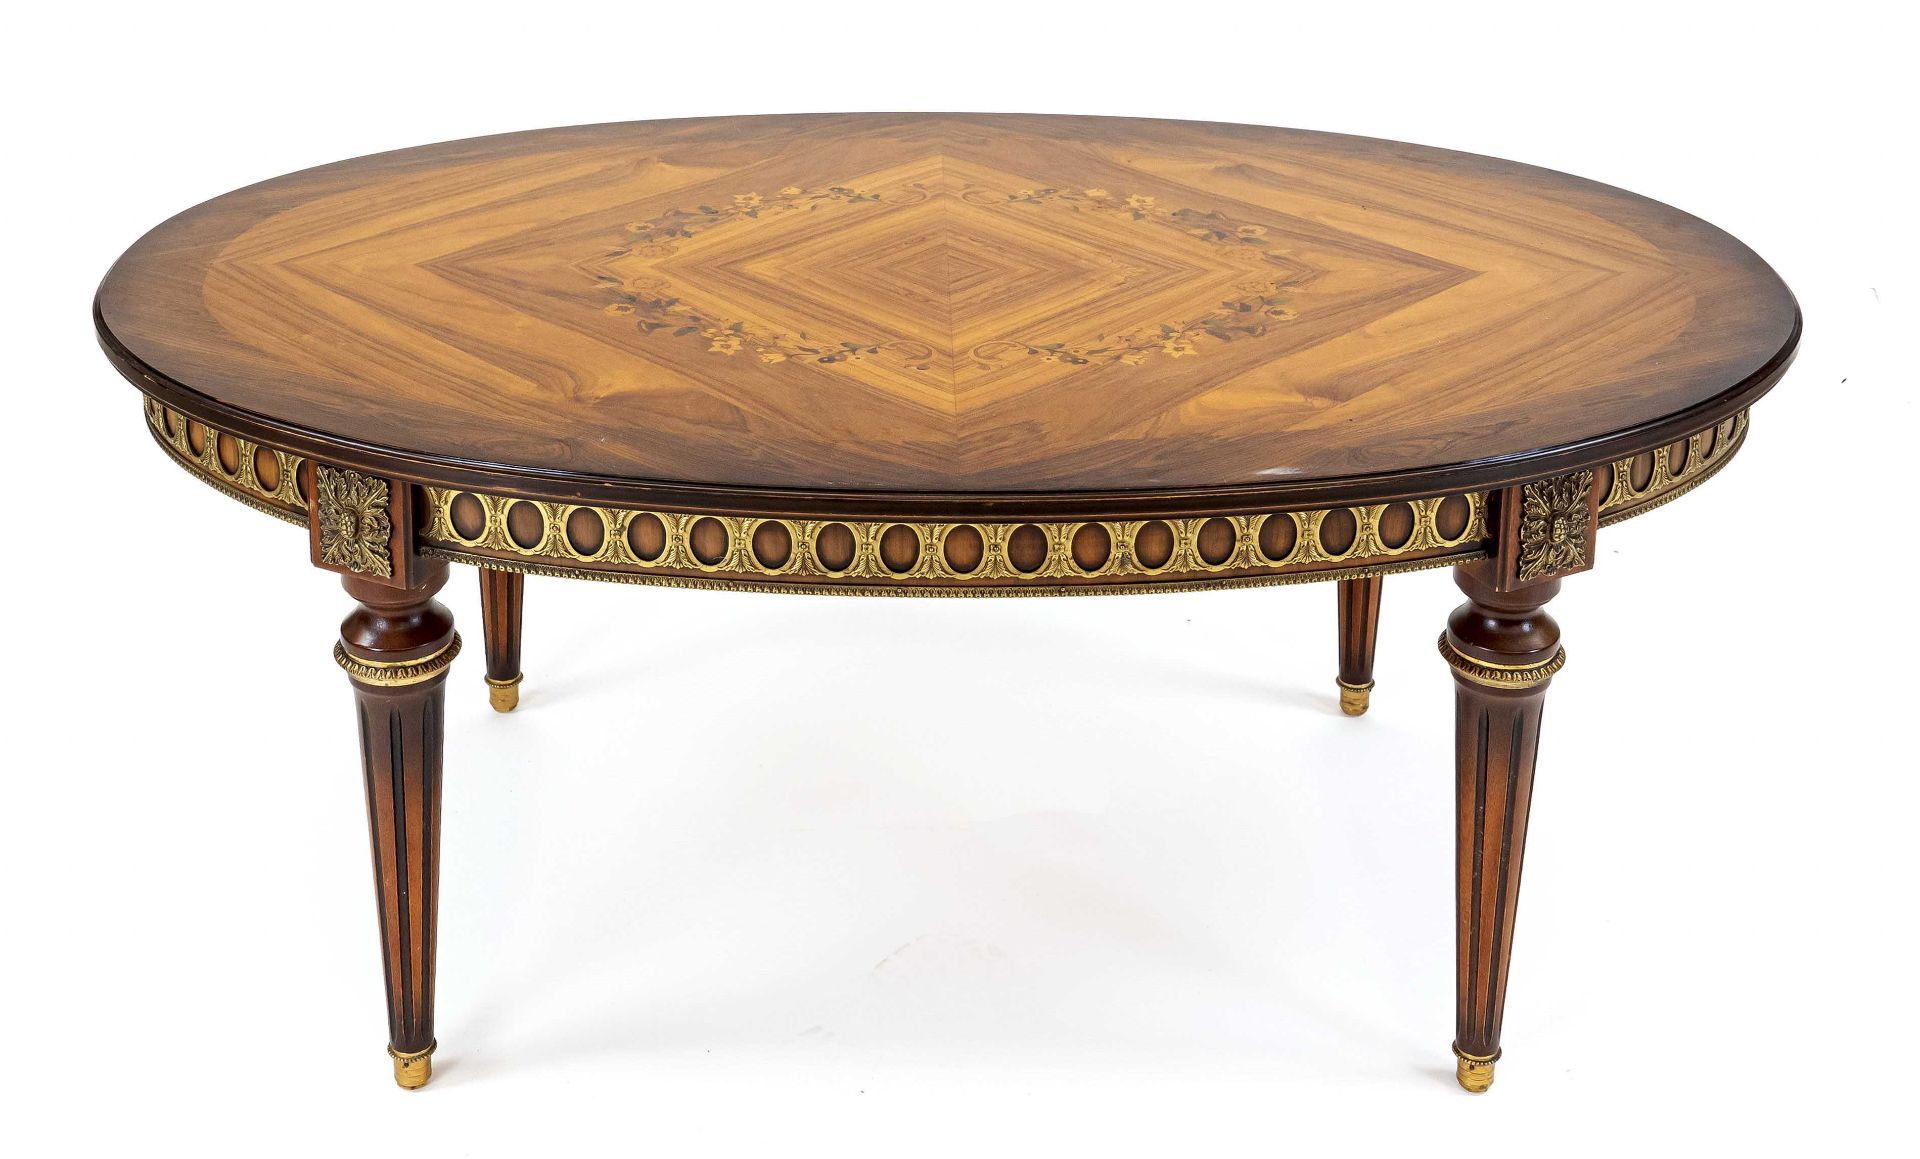 Coffee table around 1970, classicist style furniture, various precious woods, center floral inlay,